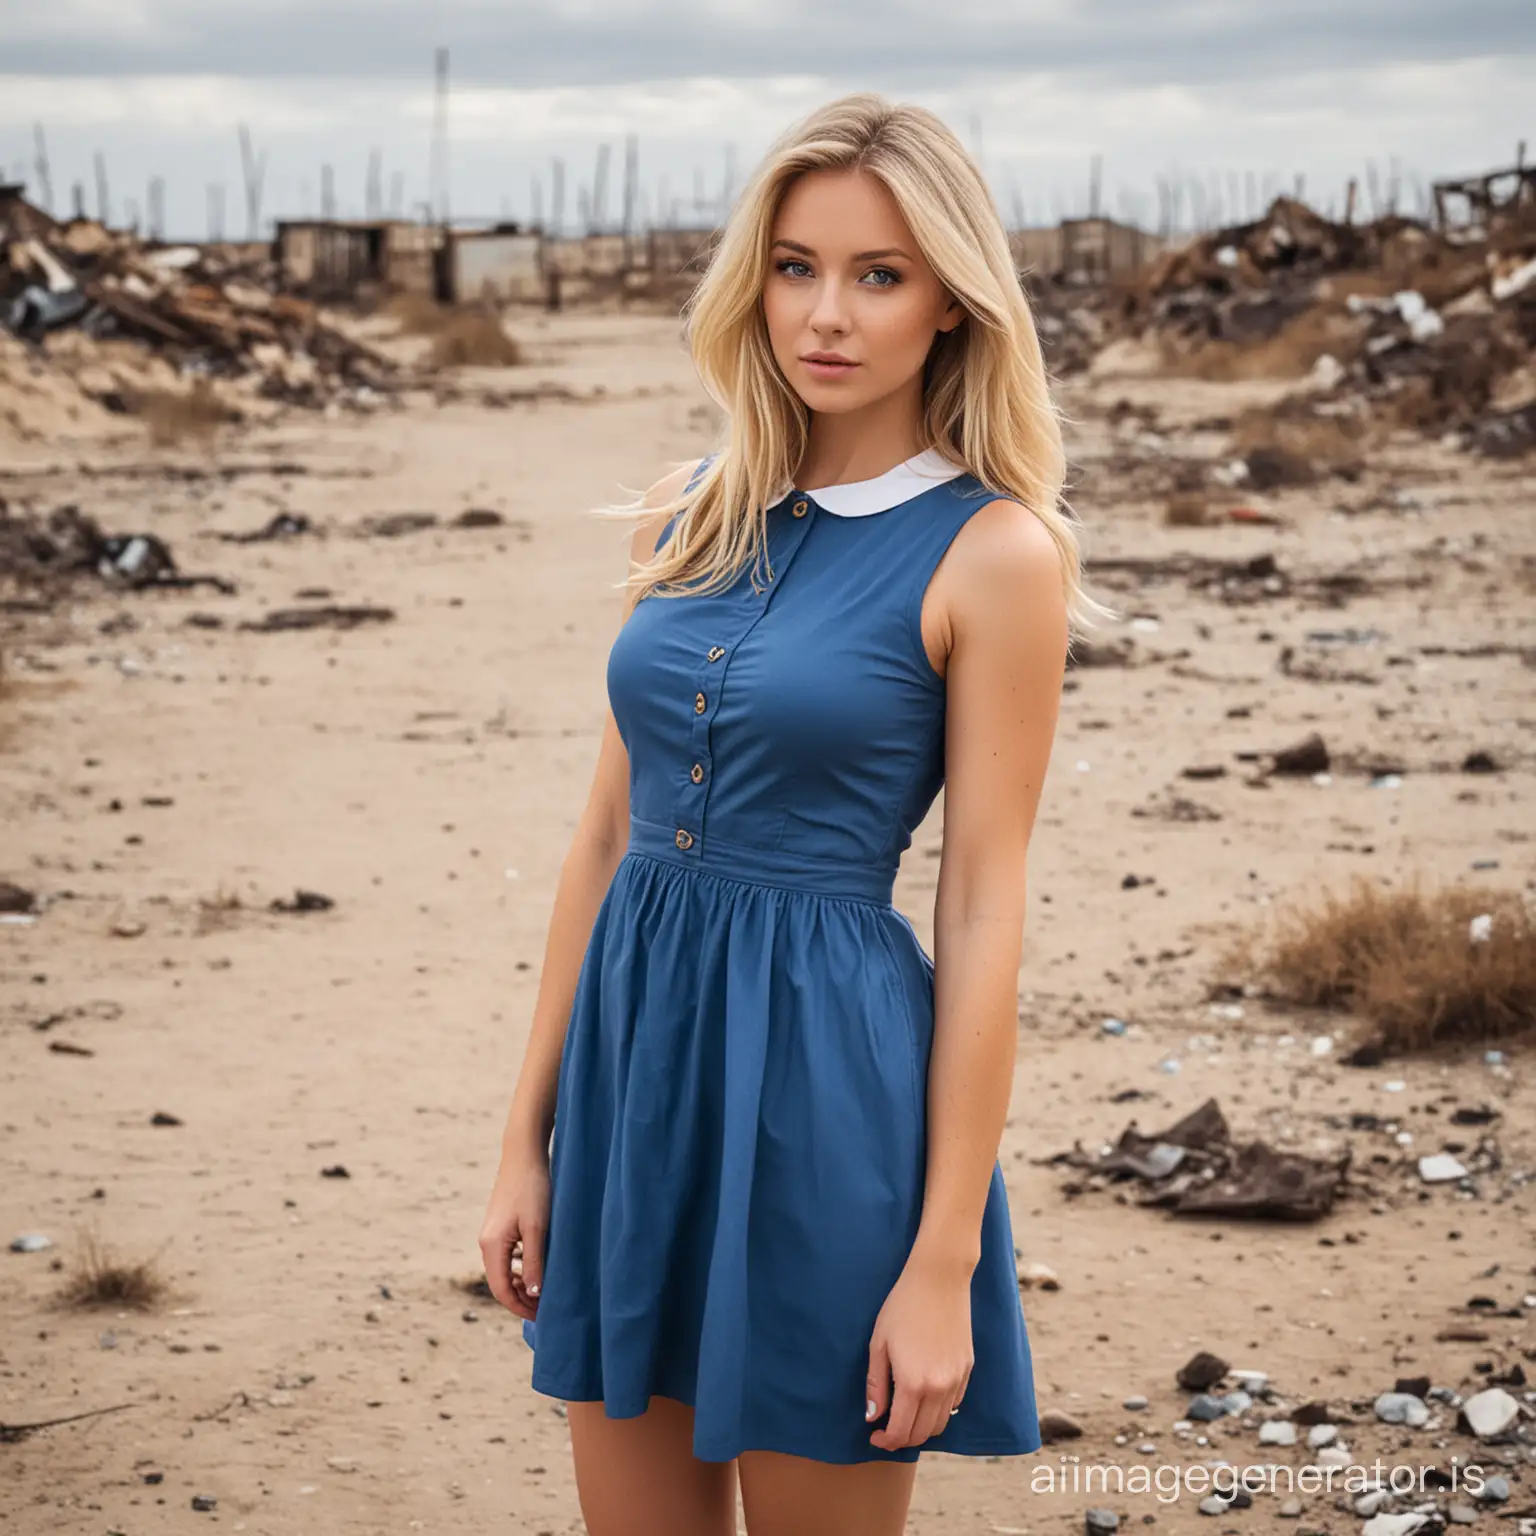 Beautiful blonde with preppy blue dress in wasteland